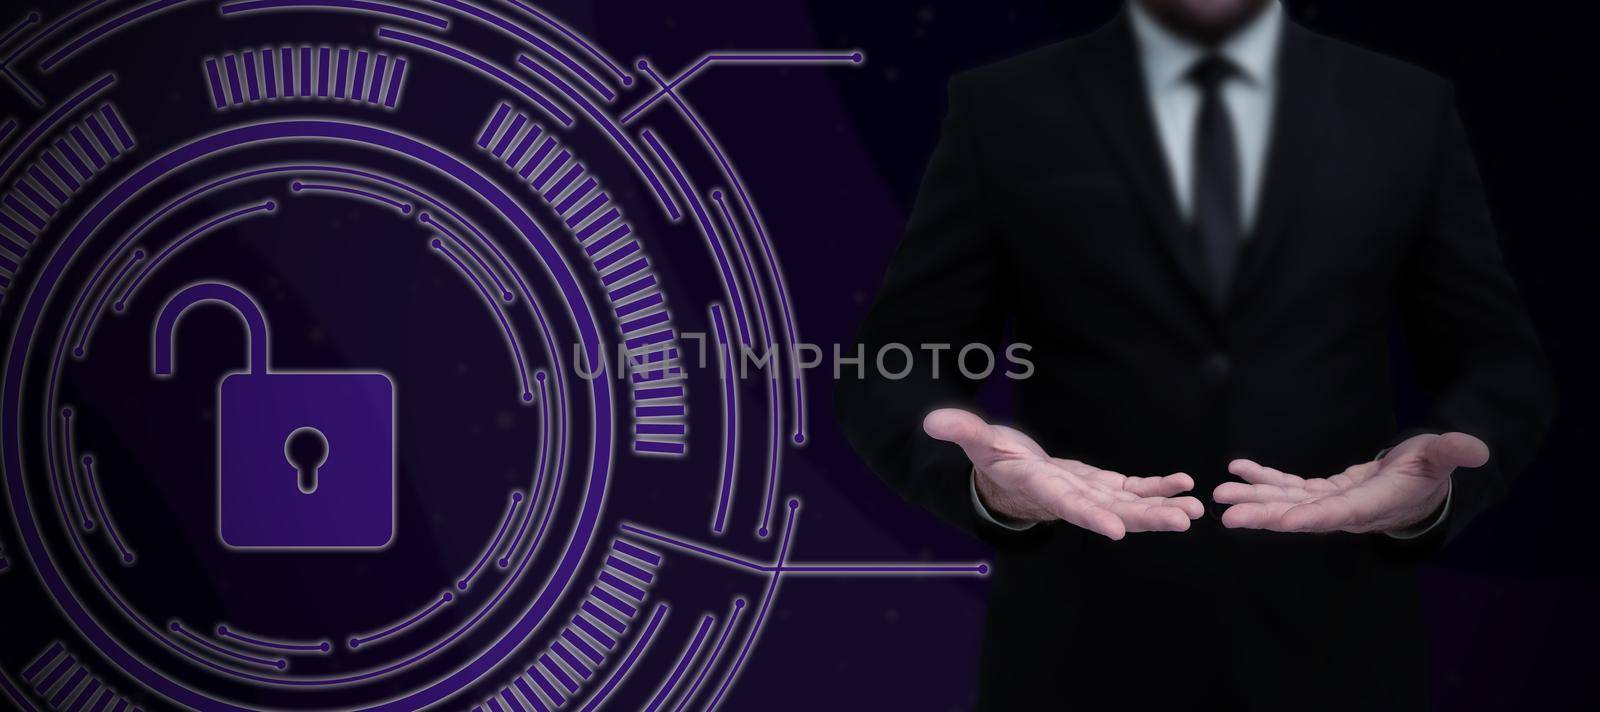 Businessman in suit holding open palm symbolizing successful teamwork.